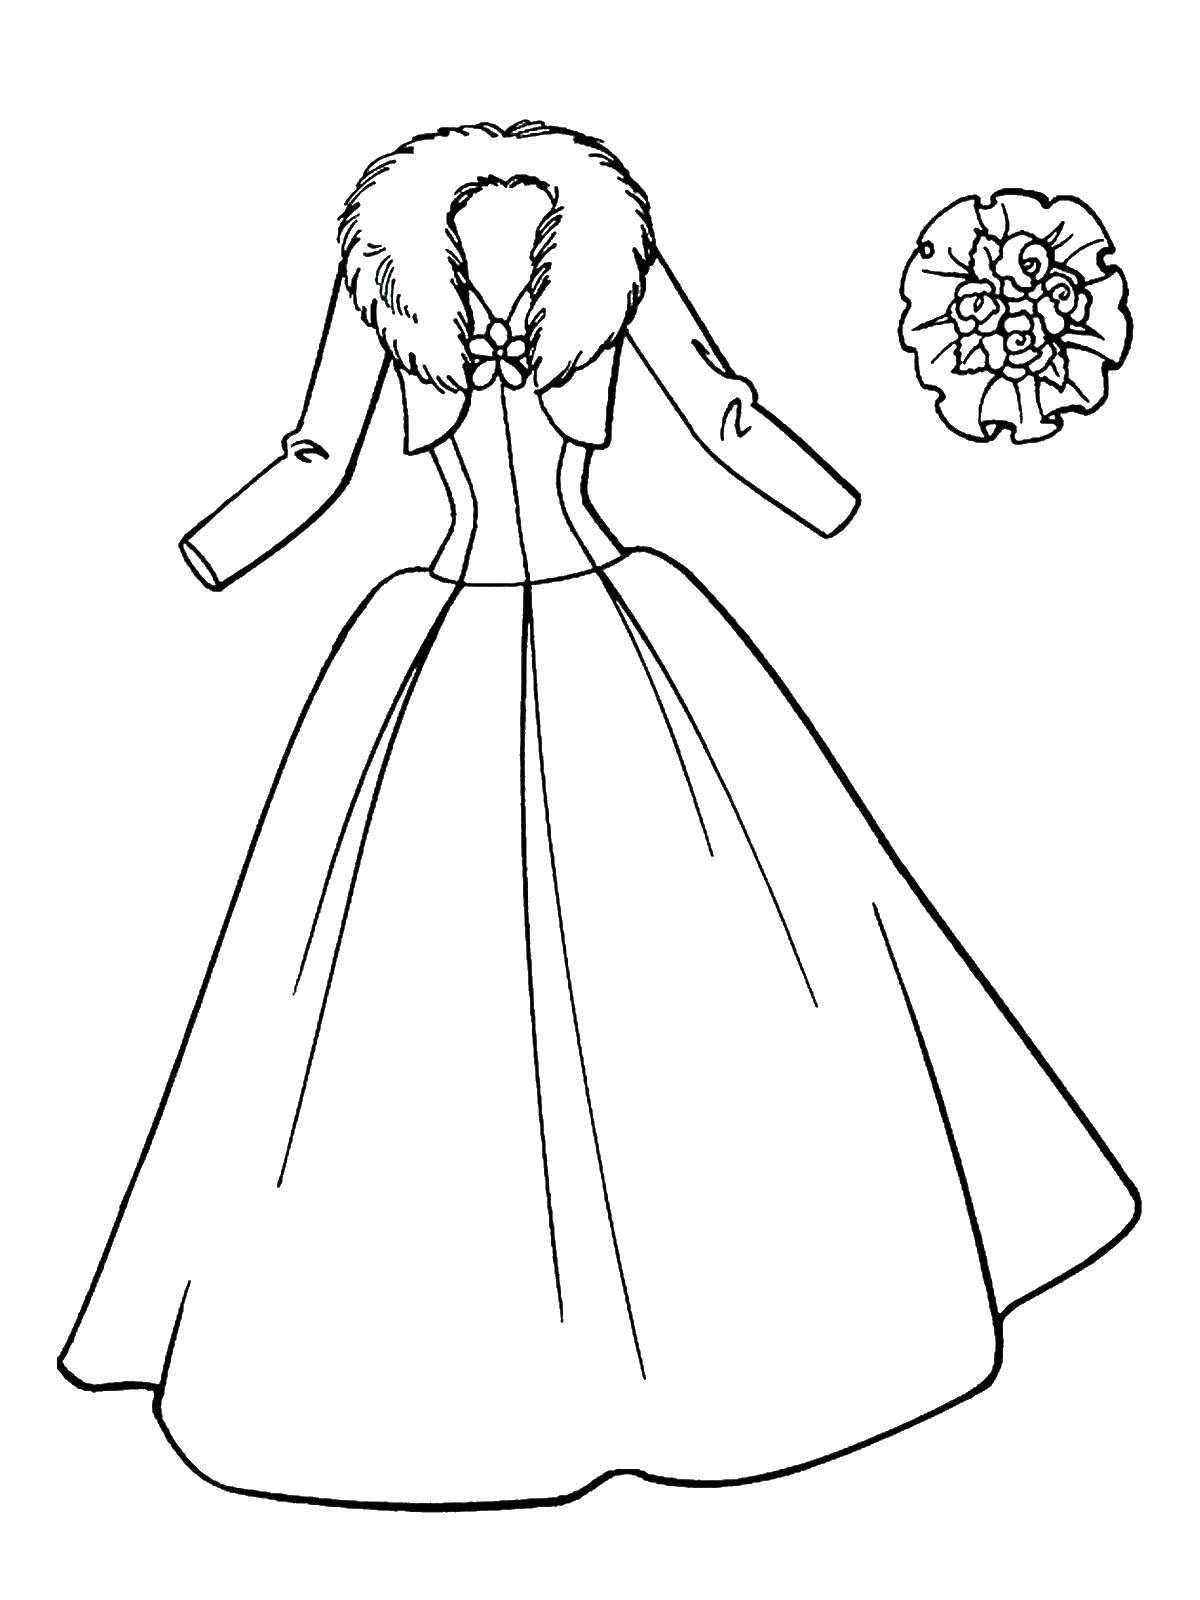 Coloring Dress and flowers. Category clothing. Tags:  clothing. dress, flowers.